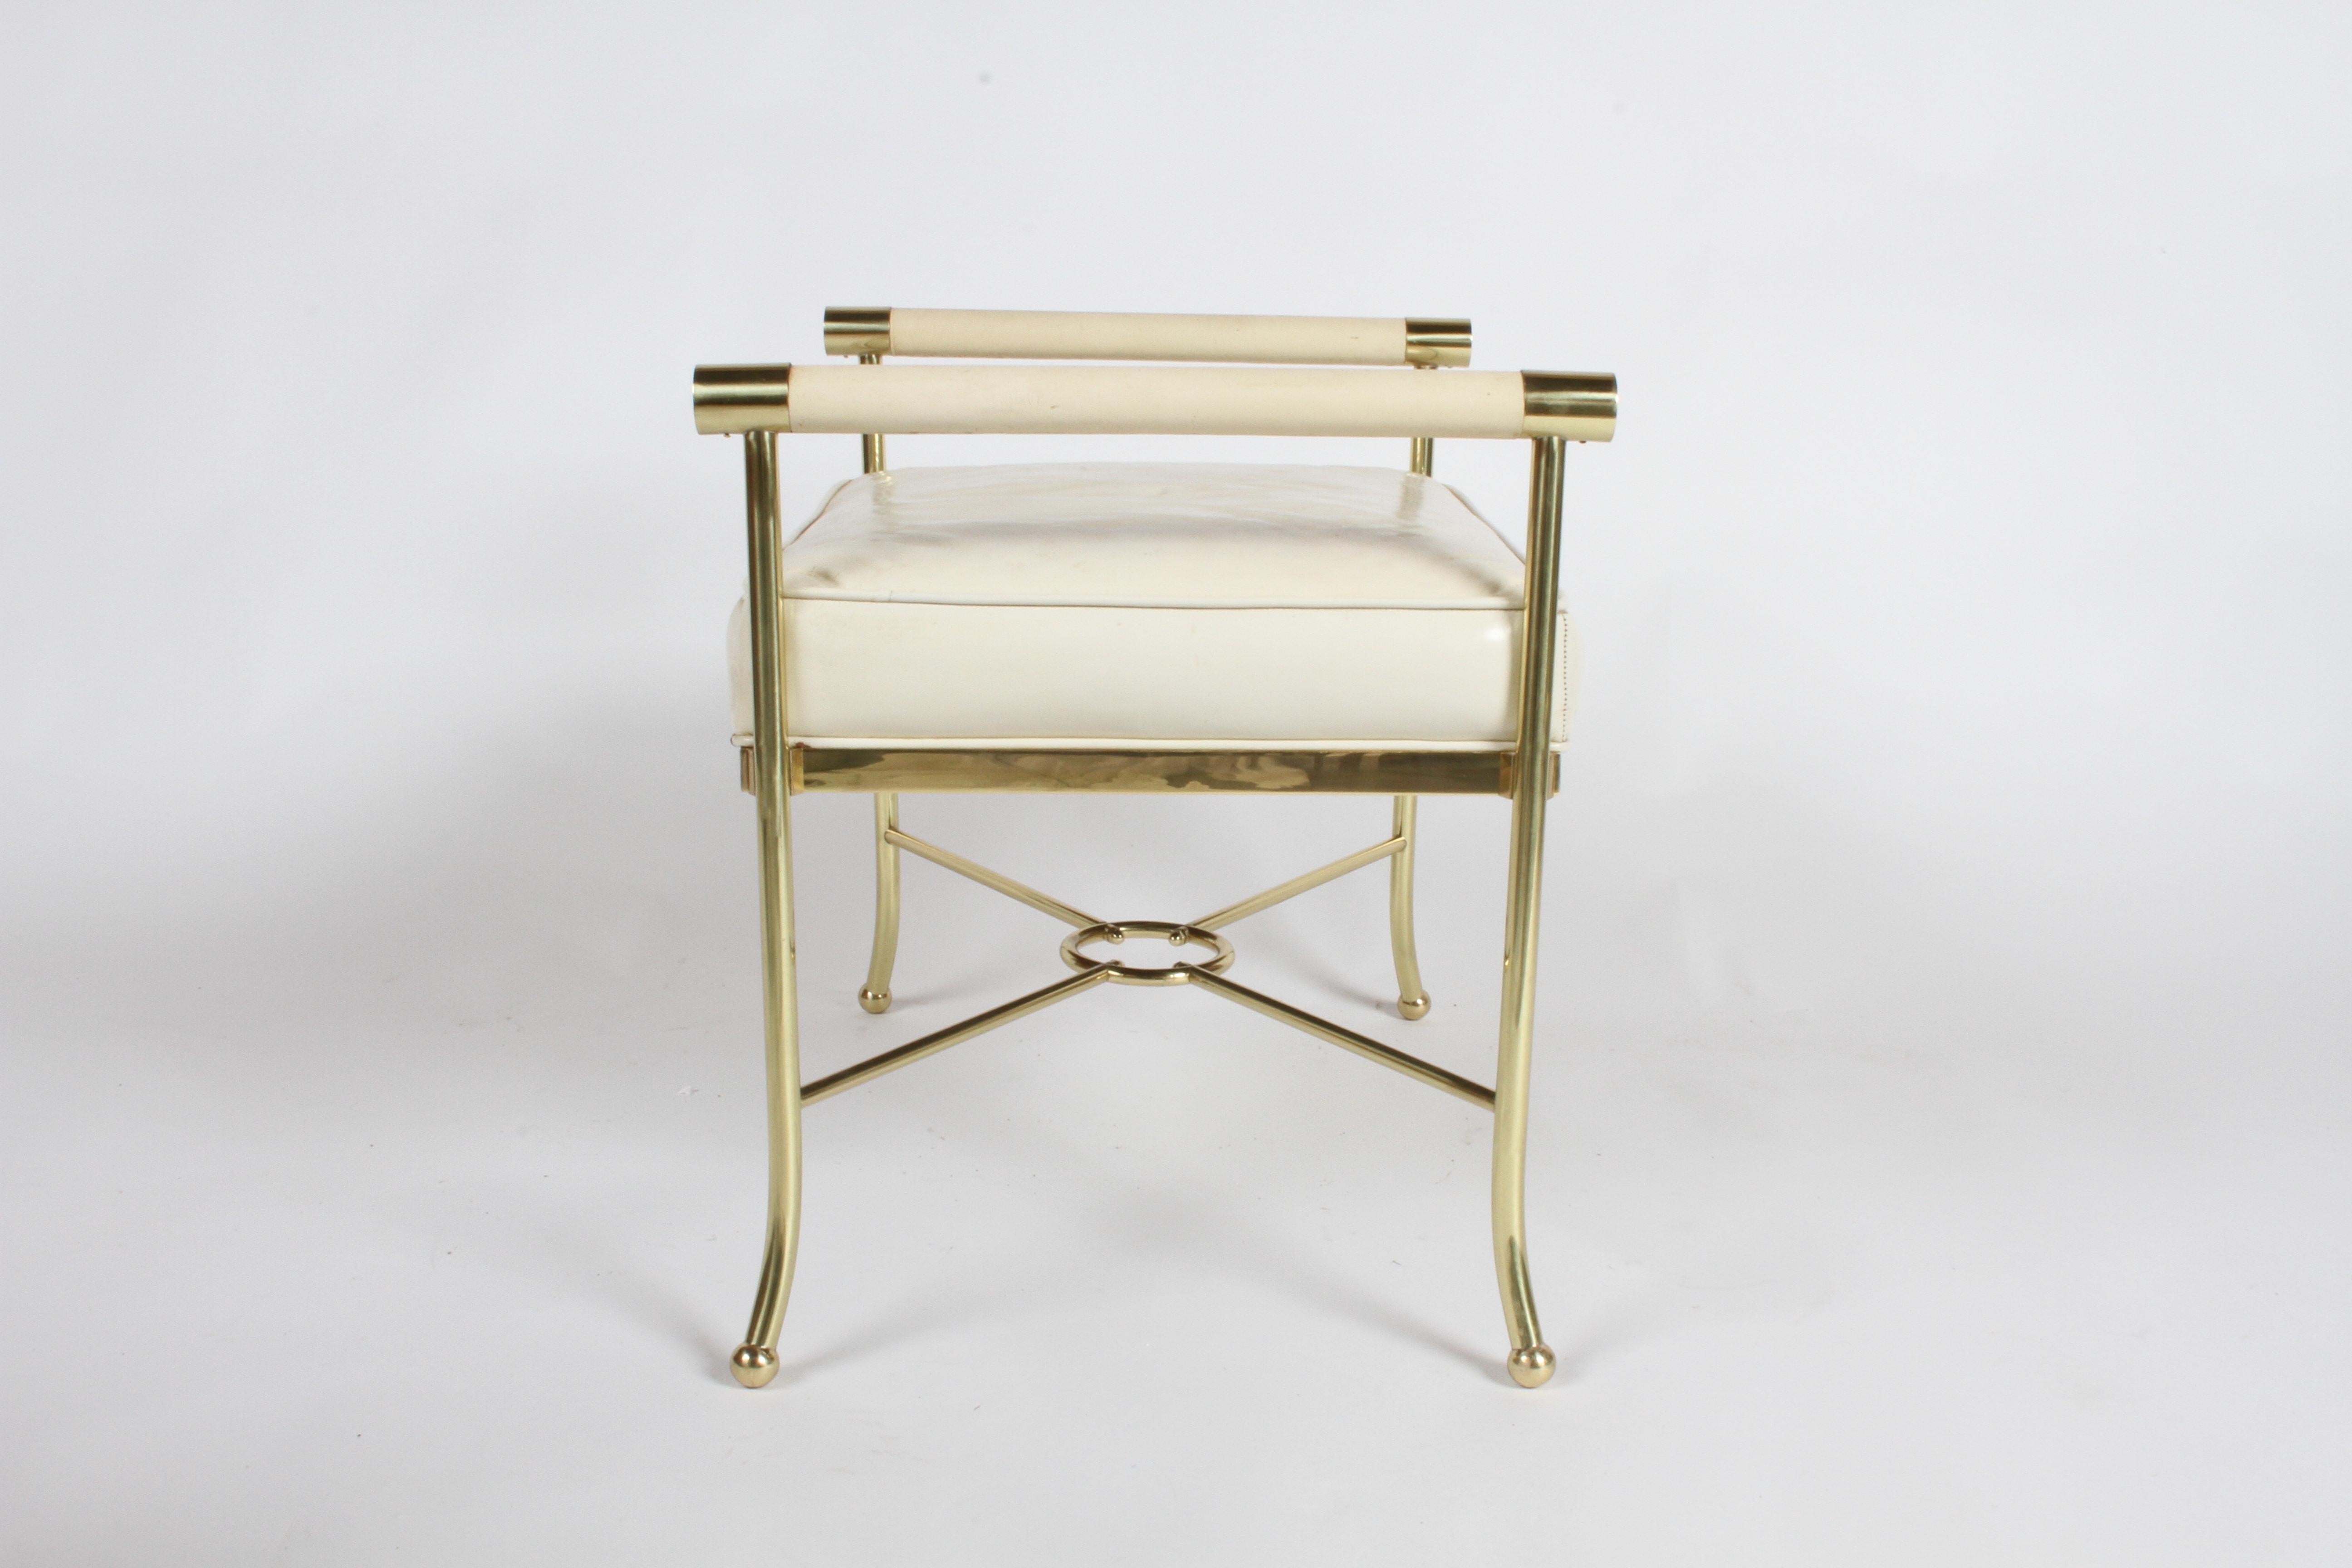 American Hollywood Regency Brass and Leather Vanity Bench